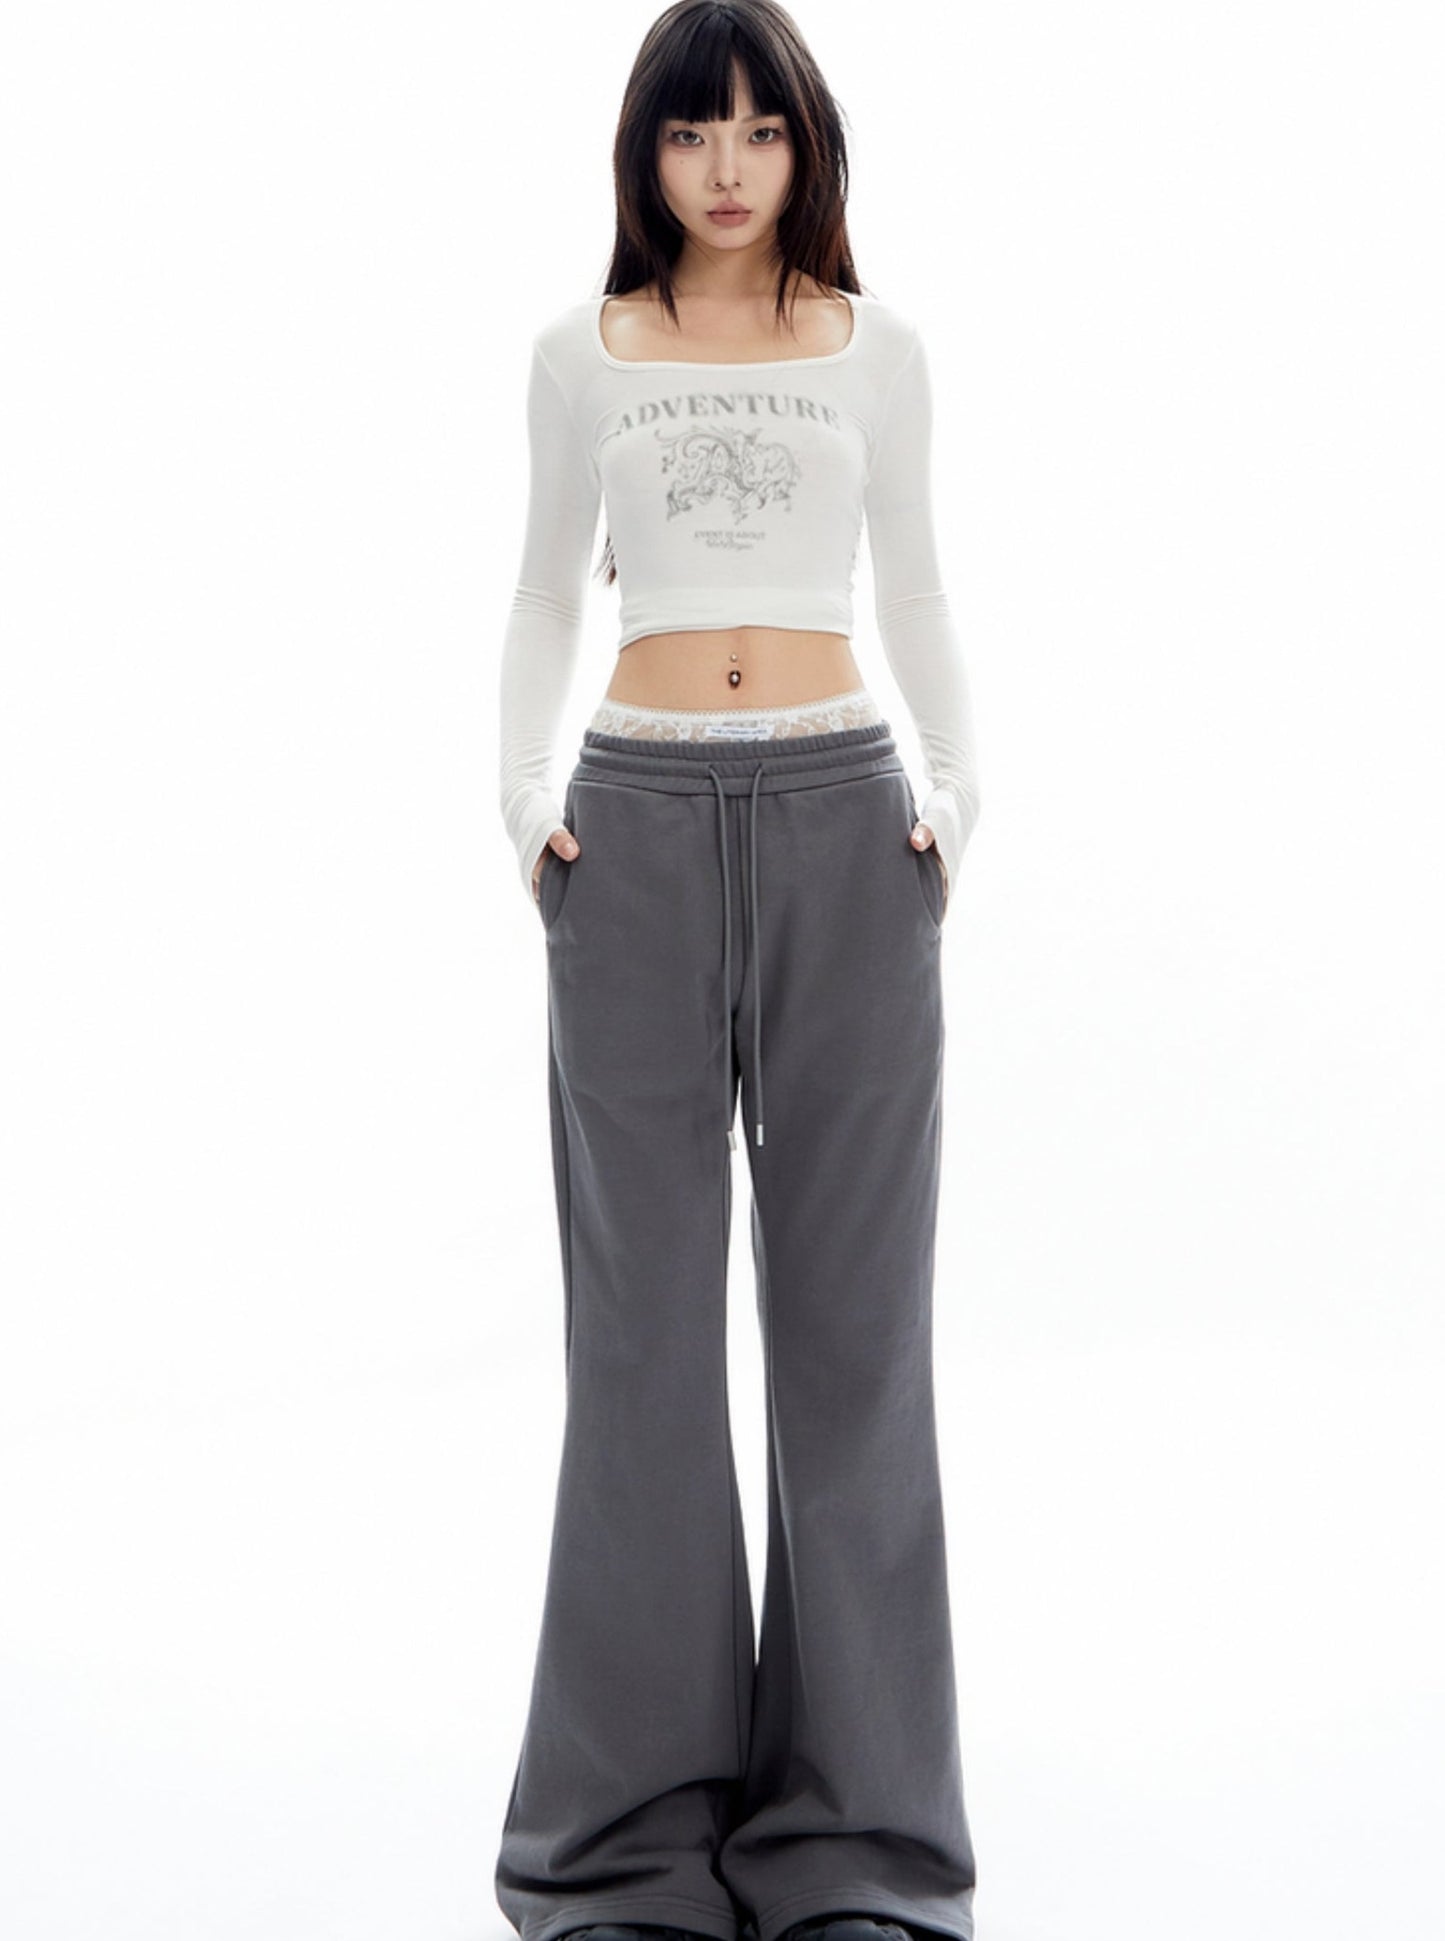 American Campus Stitching Casual Sweat Pants